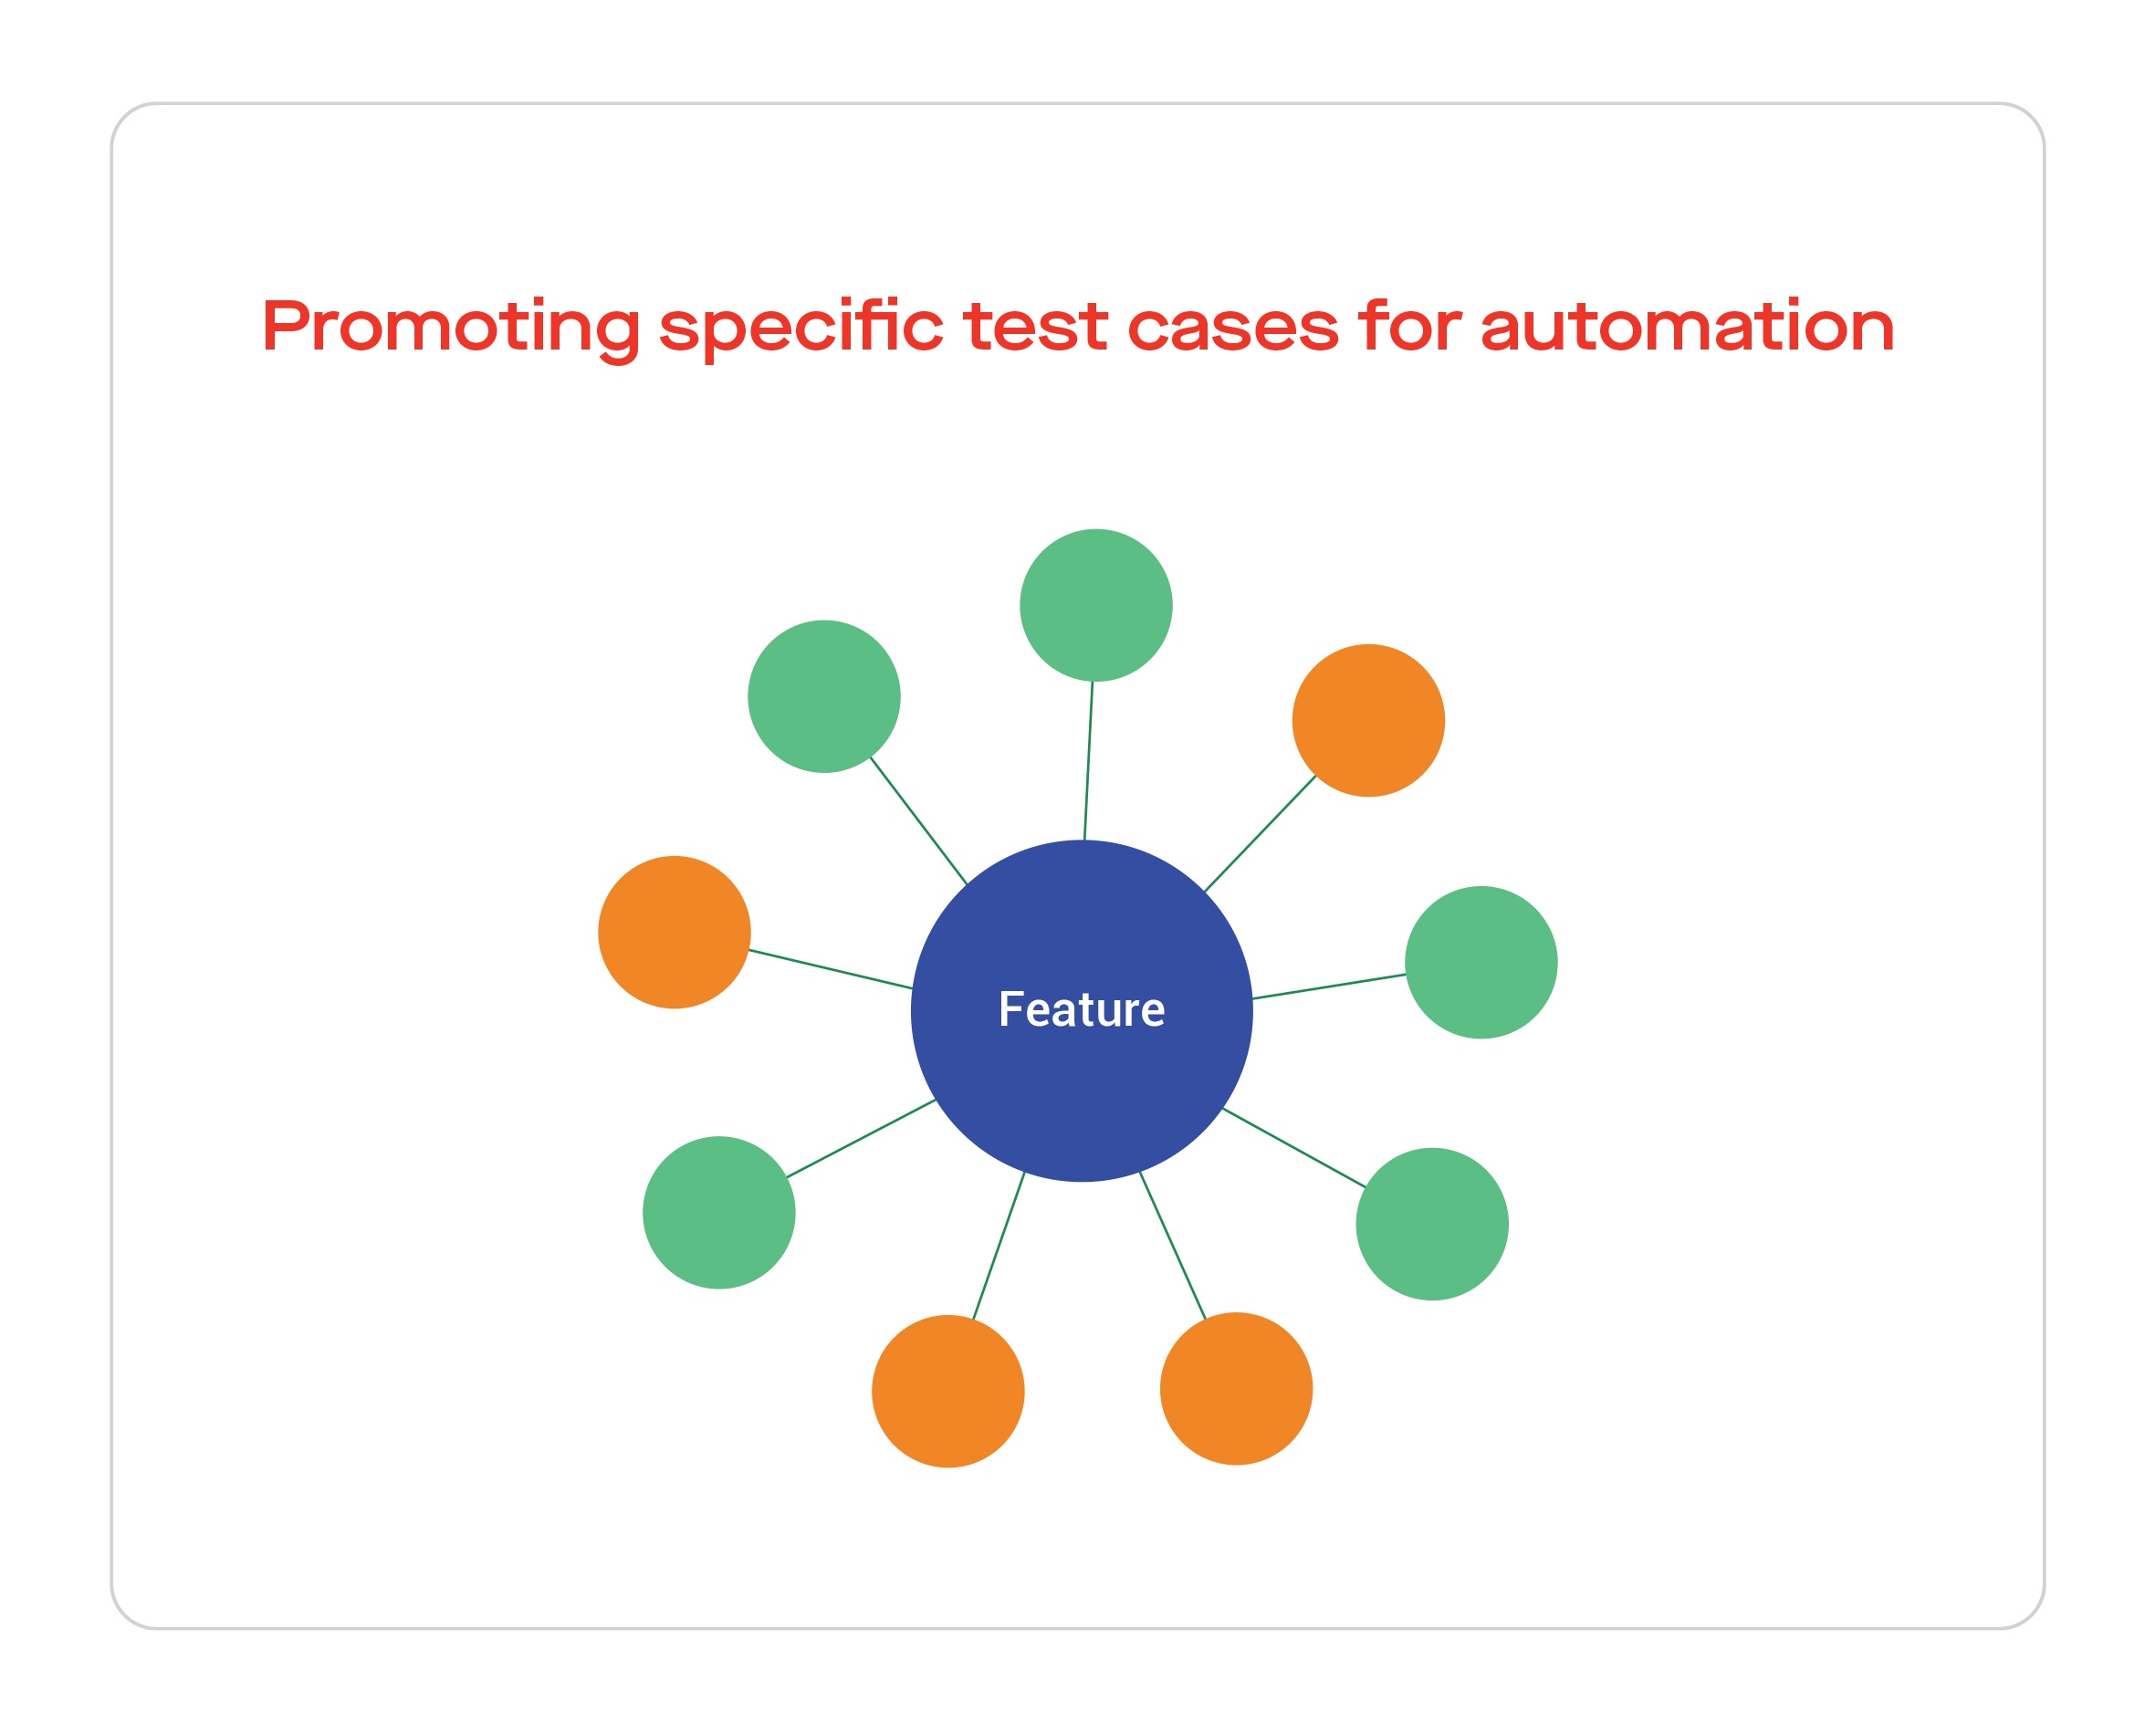 Promoting specific test cases for automation